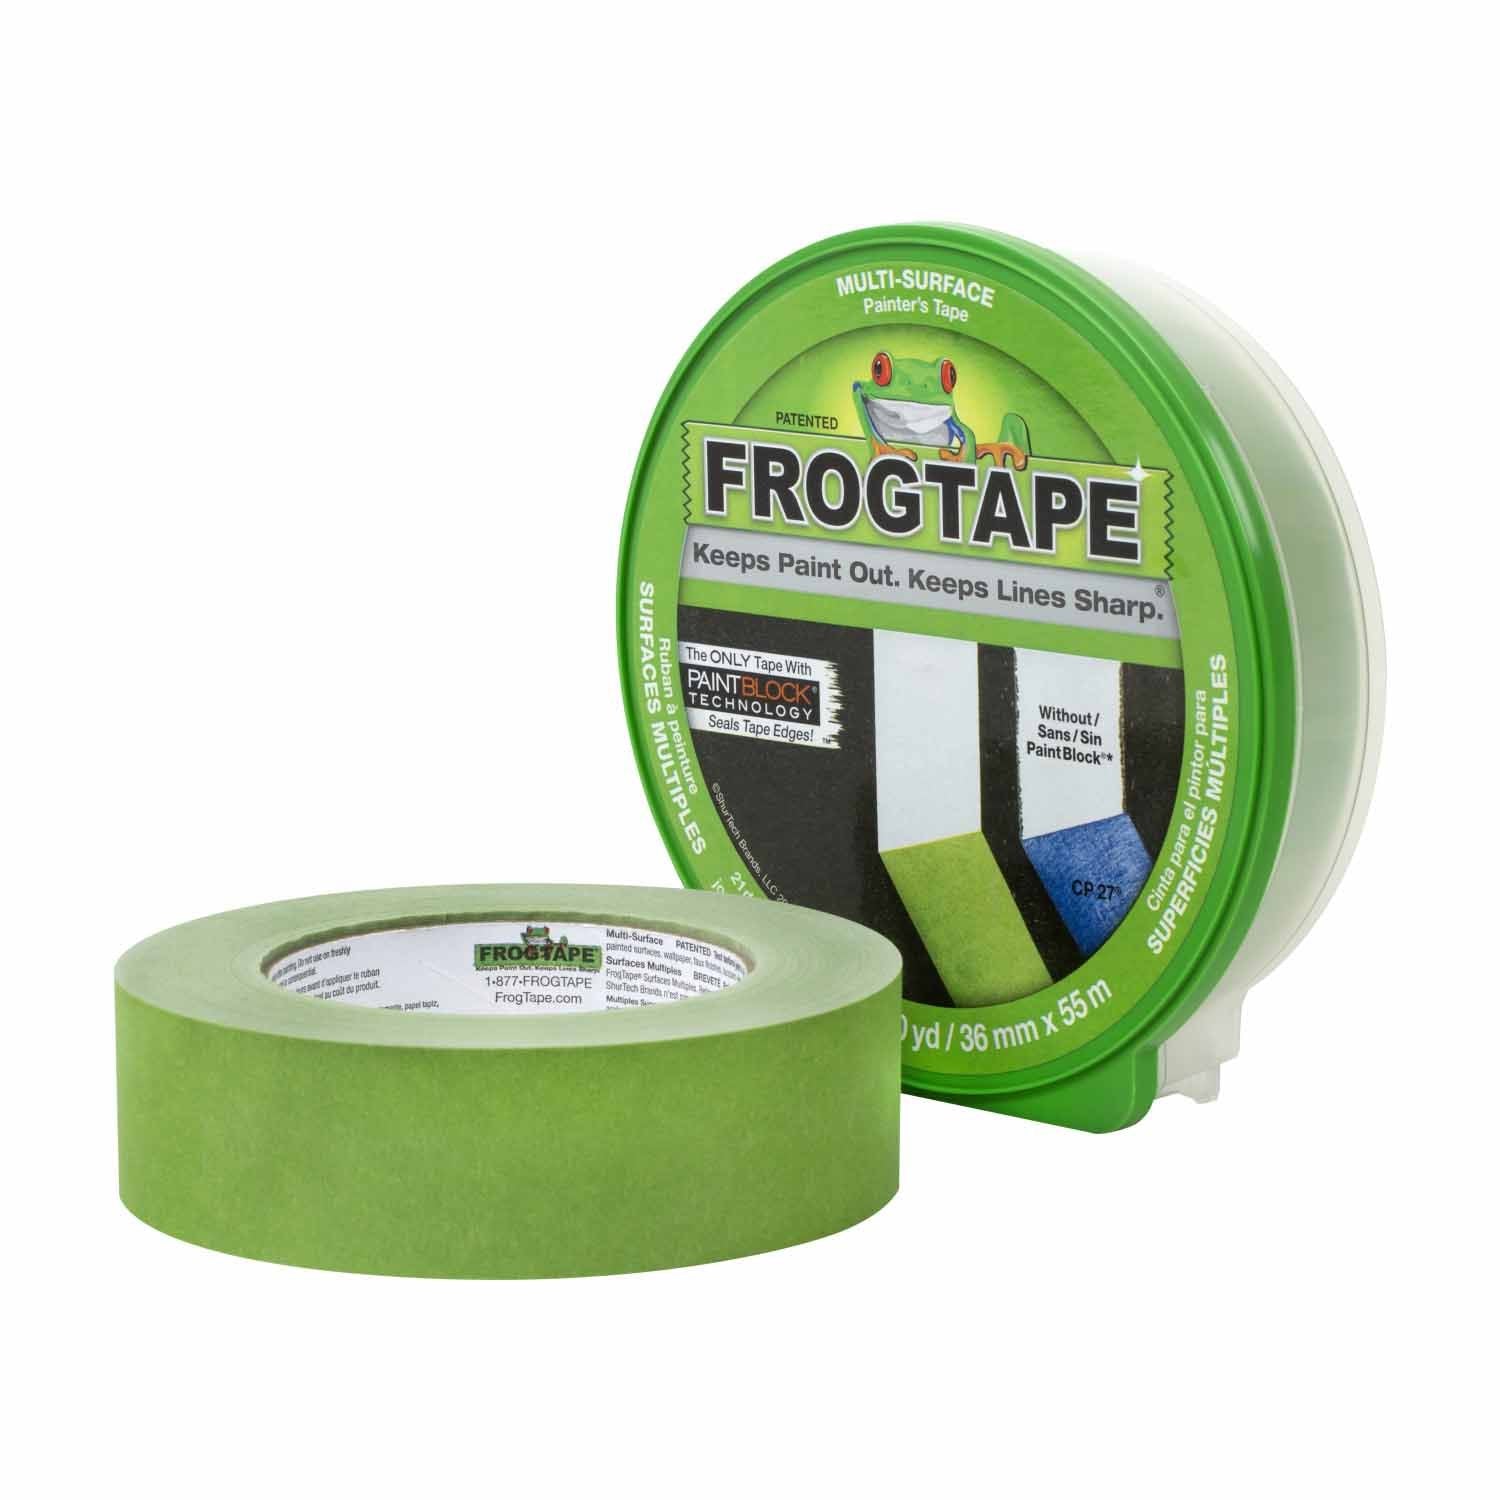 Green multi surface frogtape painter's tape, available at Wallauer Paint Centers in Westchester, Putnam, and Rockland Counties in New York.